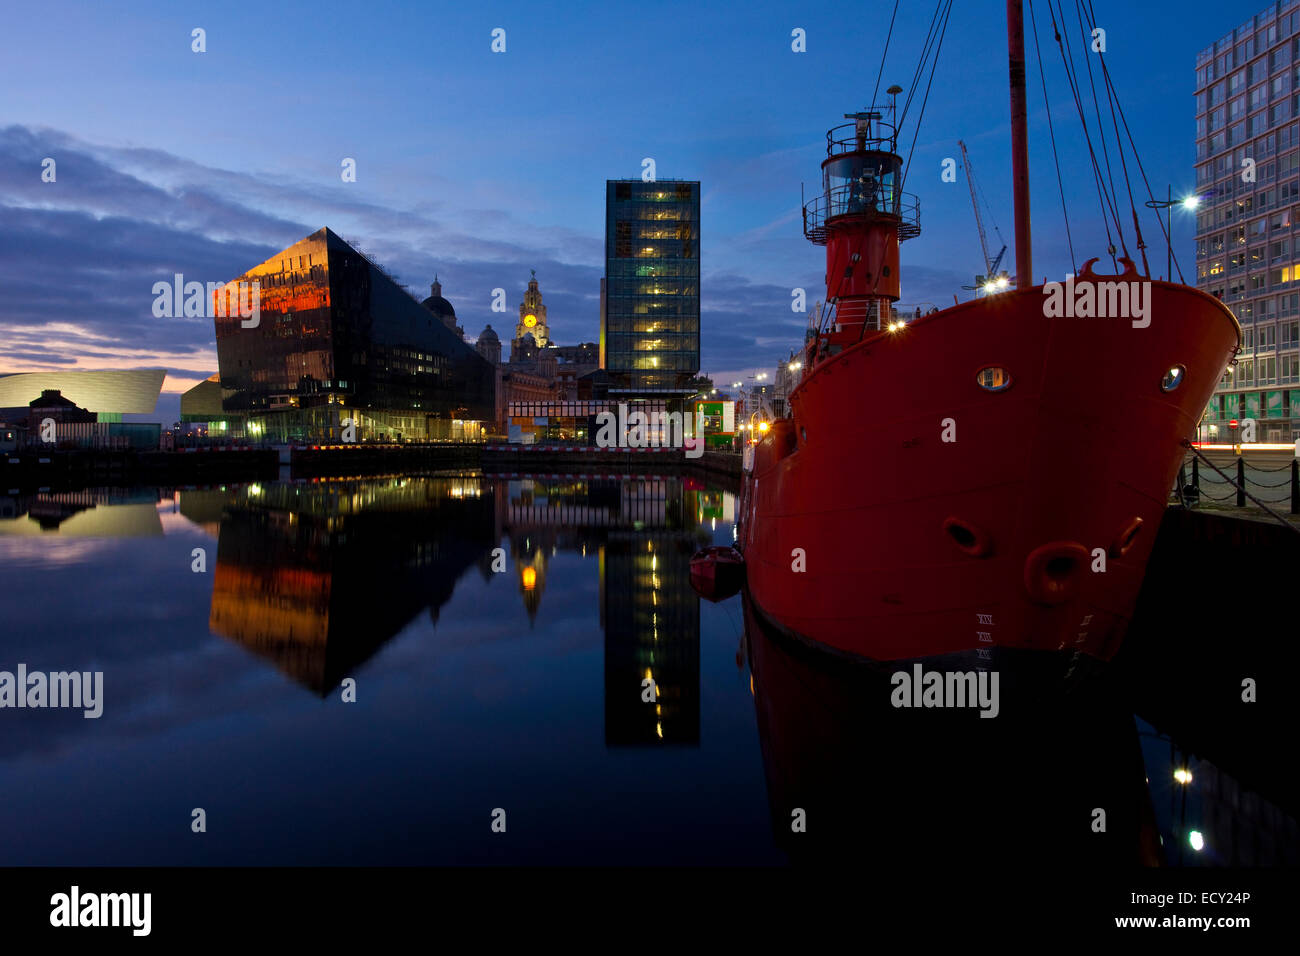 Sunset on the Mersey, Glass-walled Building. Canning dock sunset reflections of the Mann Island Development, Liverpool, Merseyside, UK Stock Photo